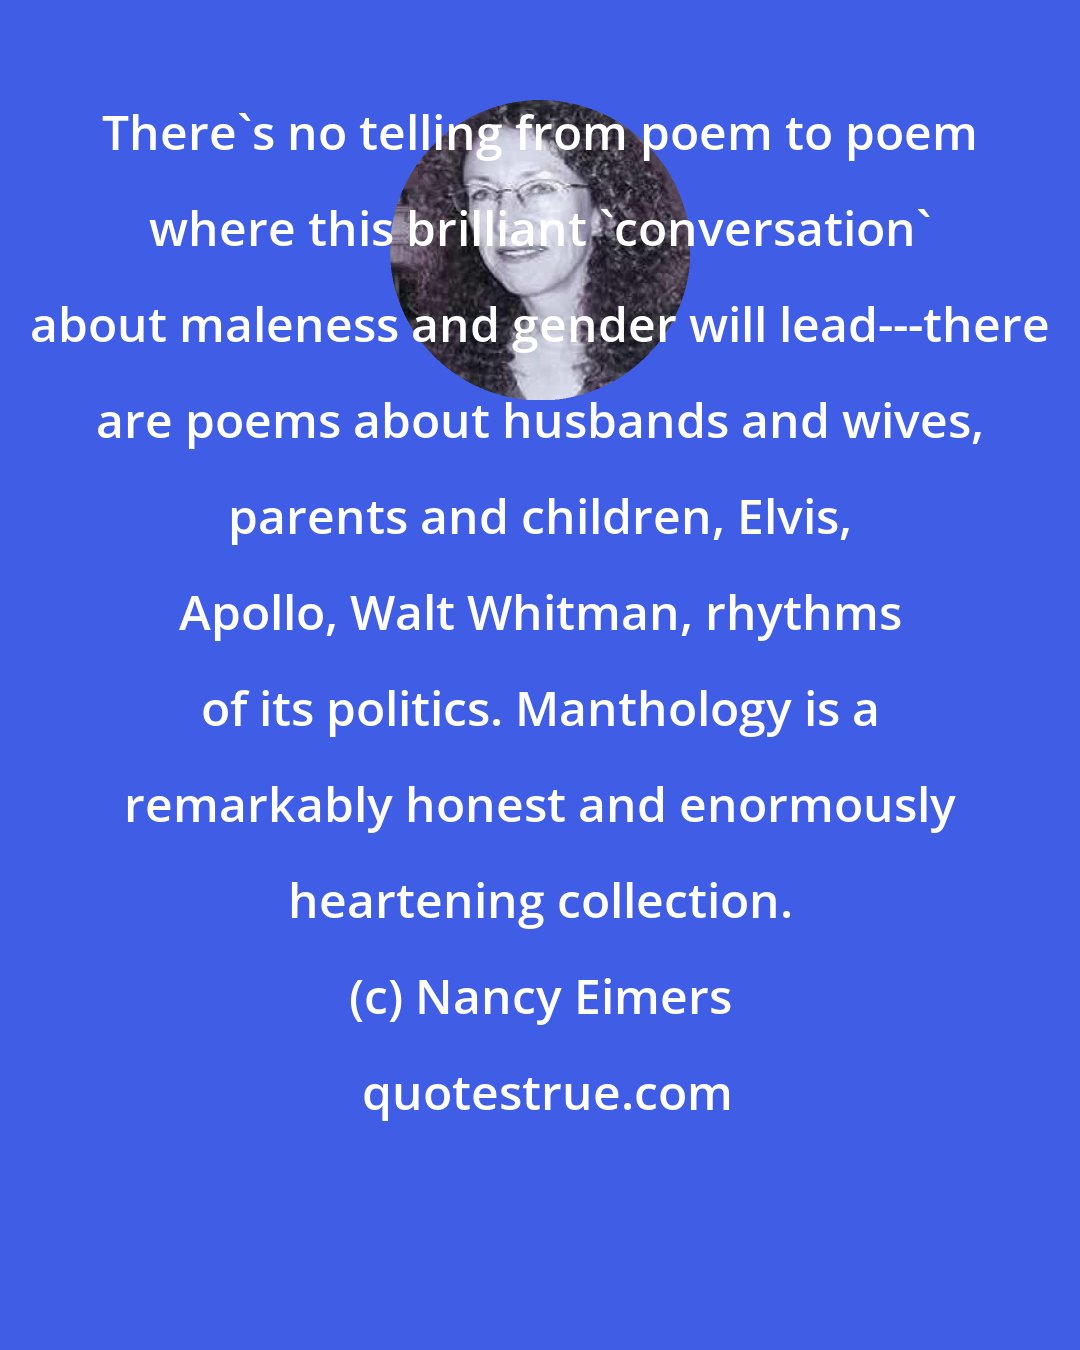 Nancy Eimers: There's no telling from poem to poem where this brilliant 'conversation' about maleness and gender will lead---there are poems about husbands and wives, parents and children, Elvis, Apollo, Walt Whitman, rhythms of its politics. Manthology is a remarkably honest and enormously heartening collection.